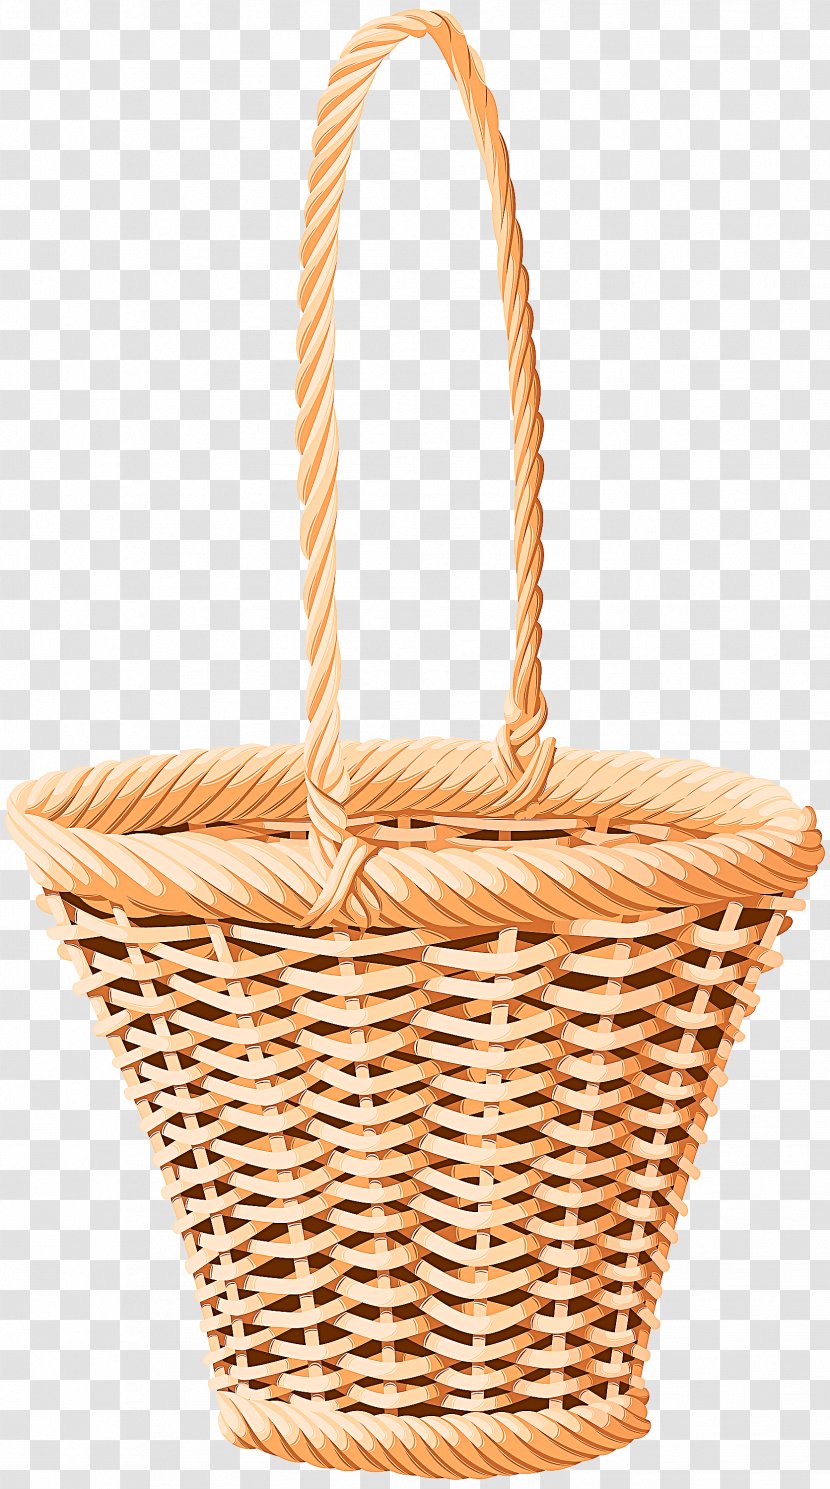 Wicker Storage Basket Picnic Home Accessories Transparent PNG